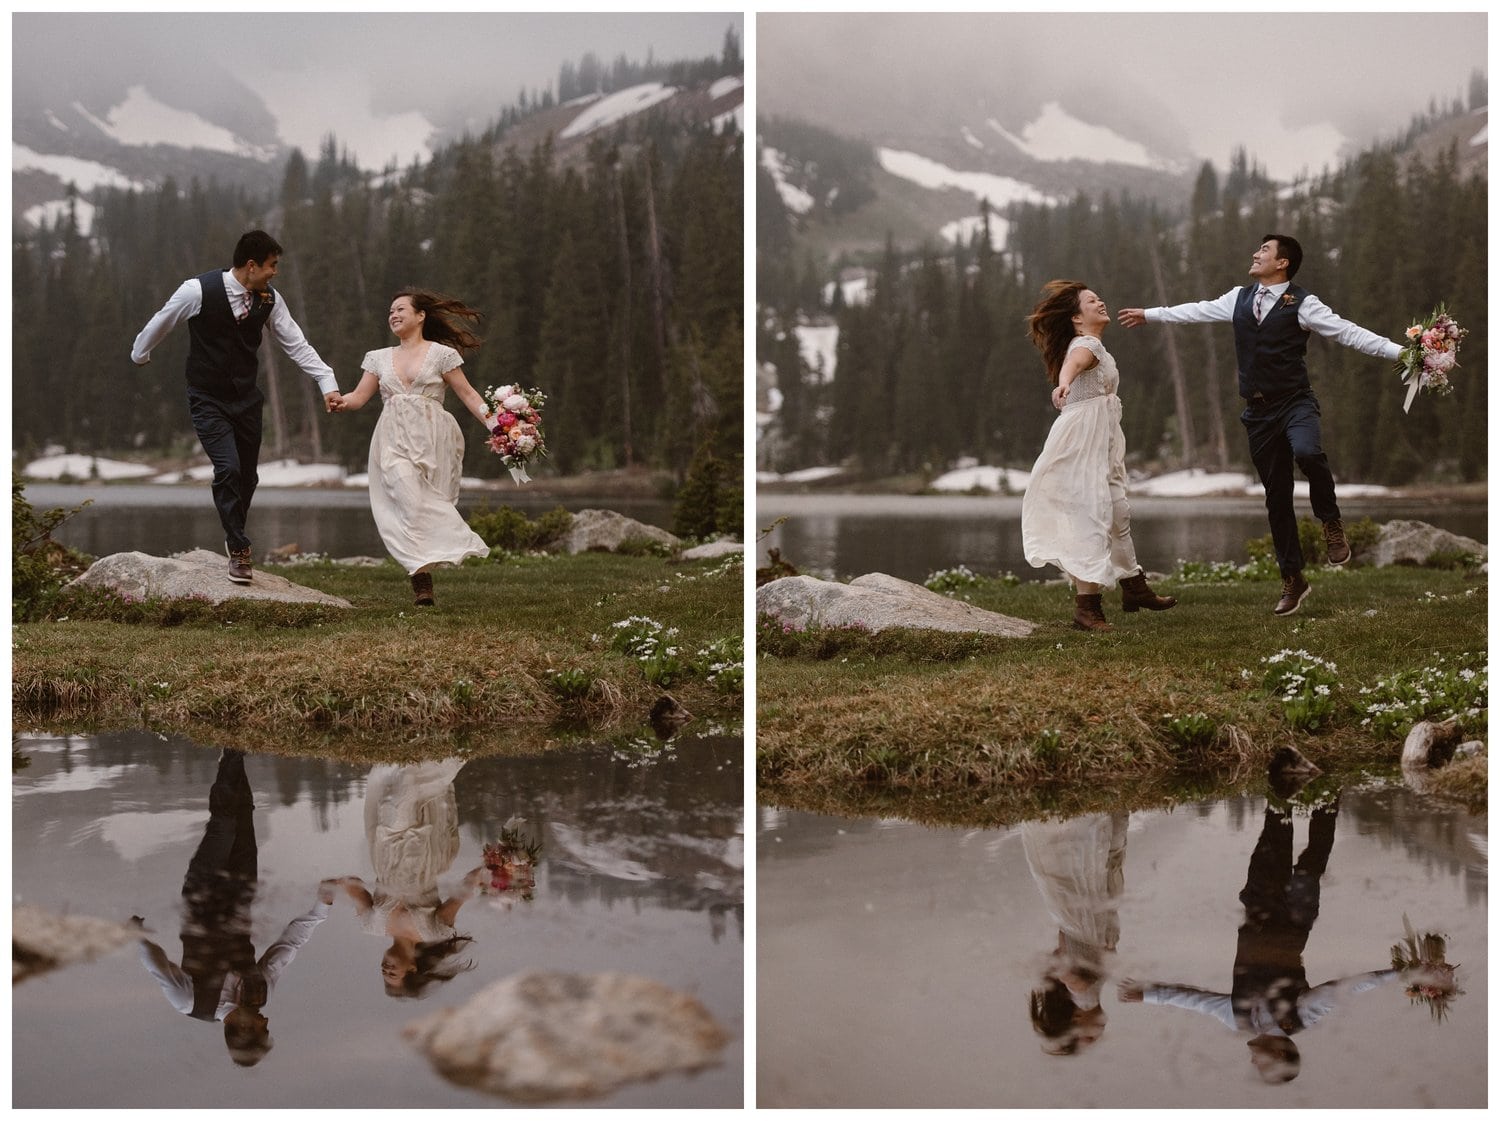 Bride and groom jumping in the air in front of a high alpine lake near Boulder, Colorado. Their reflections show in the water in front of them. Thee are trees and snow-capped mountains in the background. 